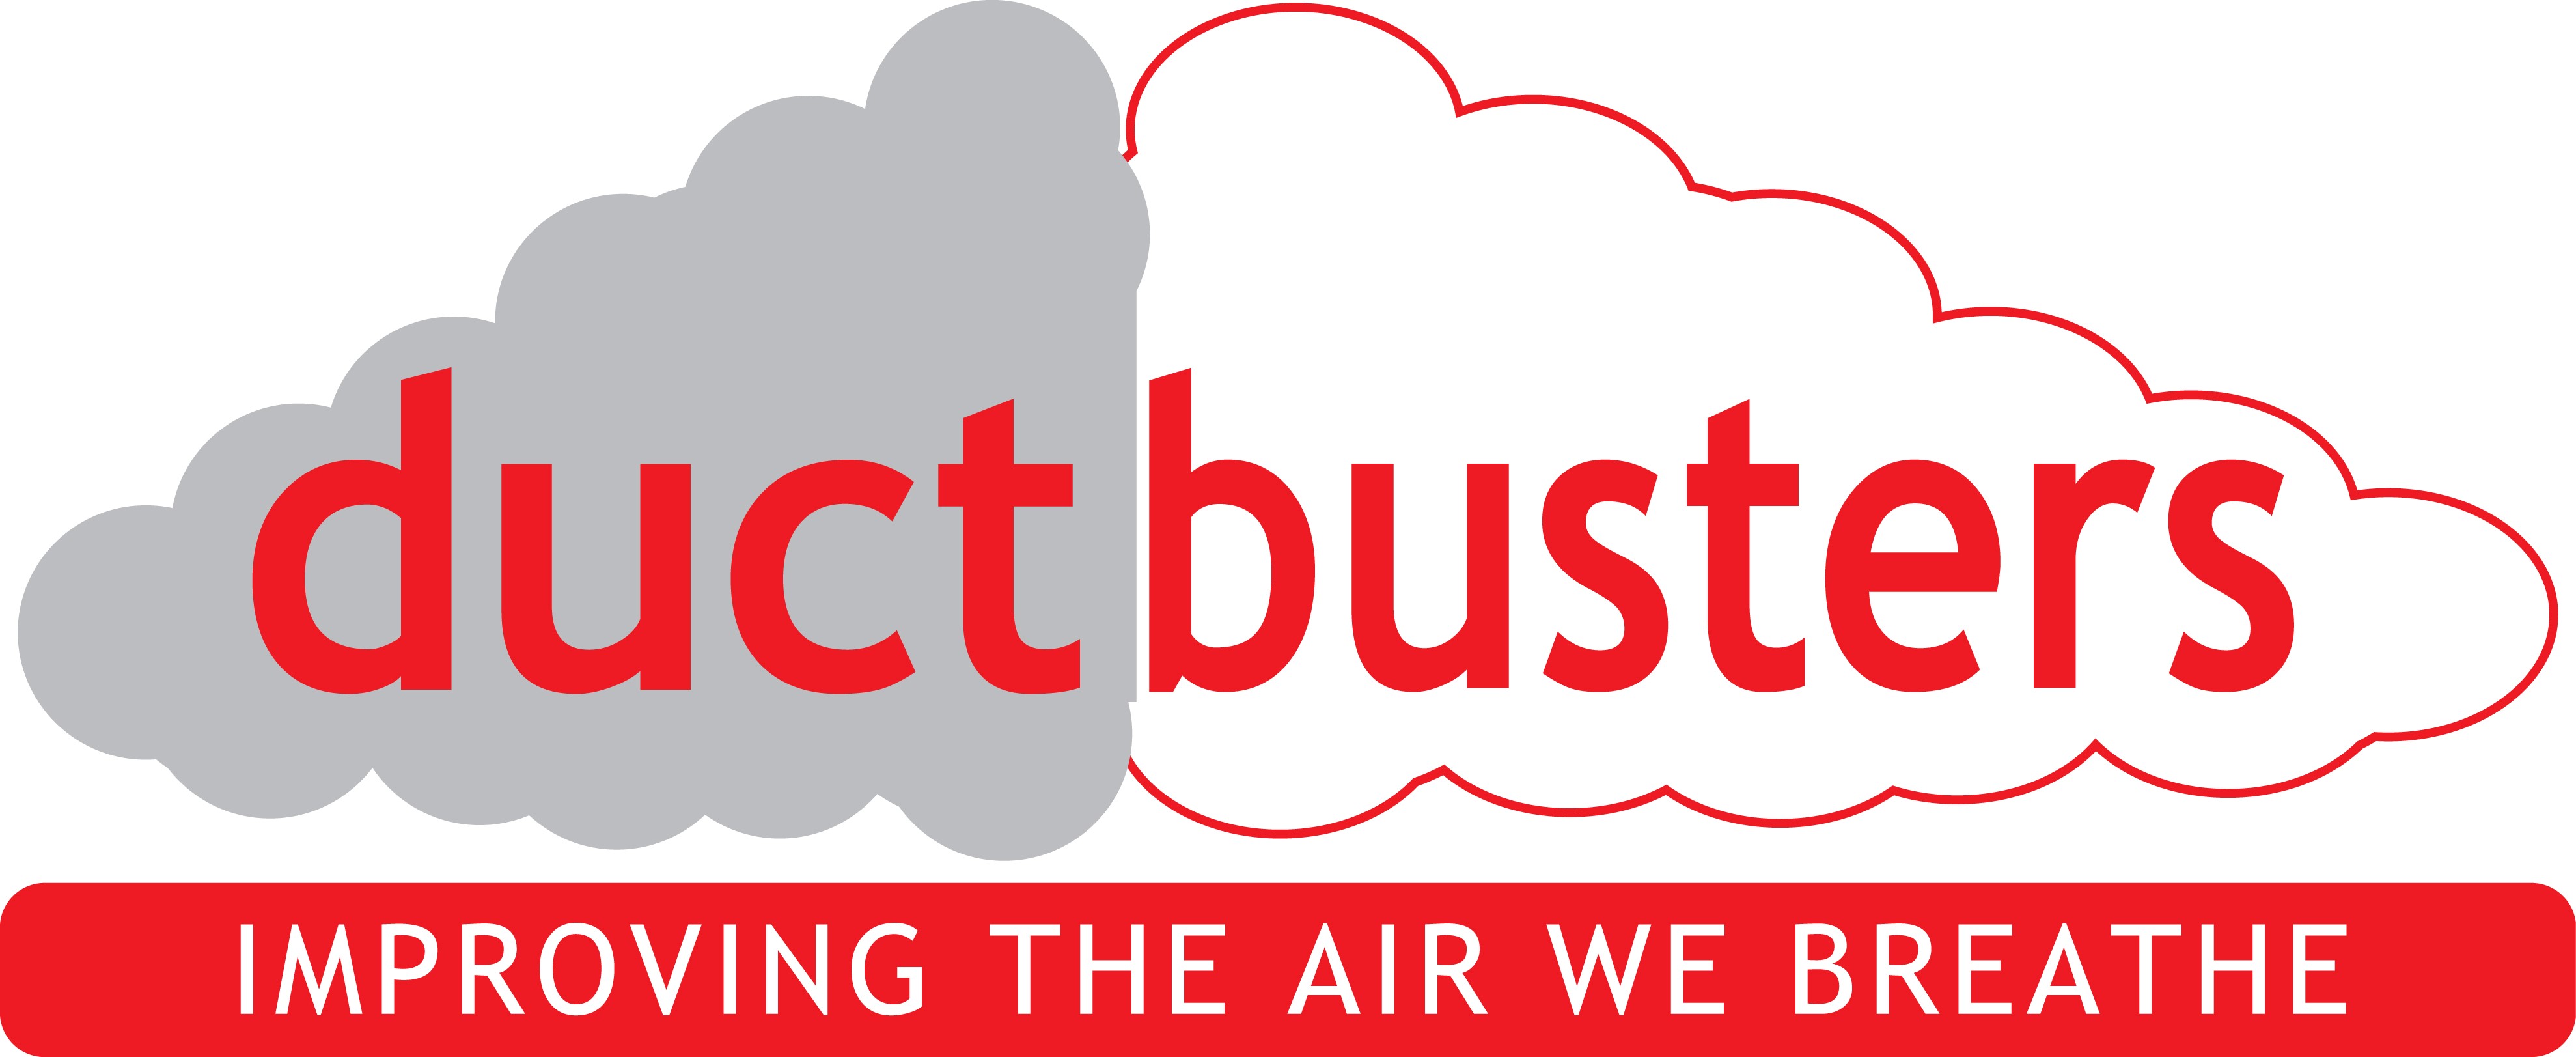 Ductbusters Ltd image.